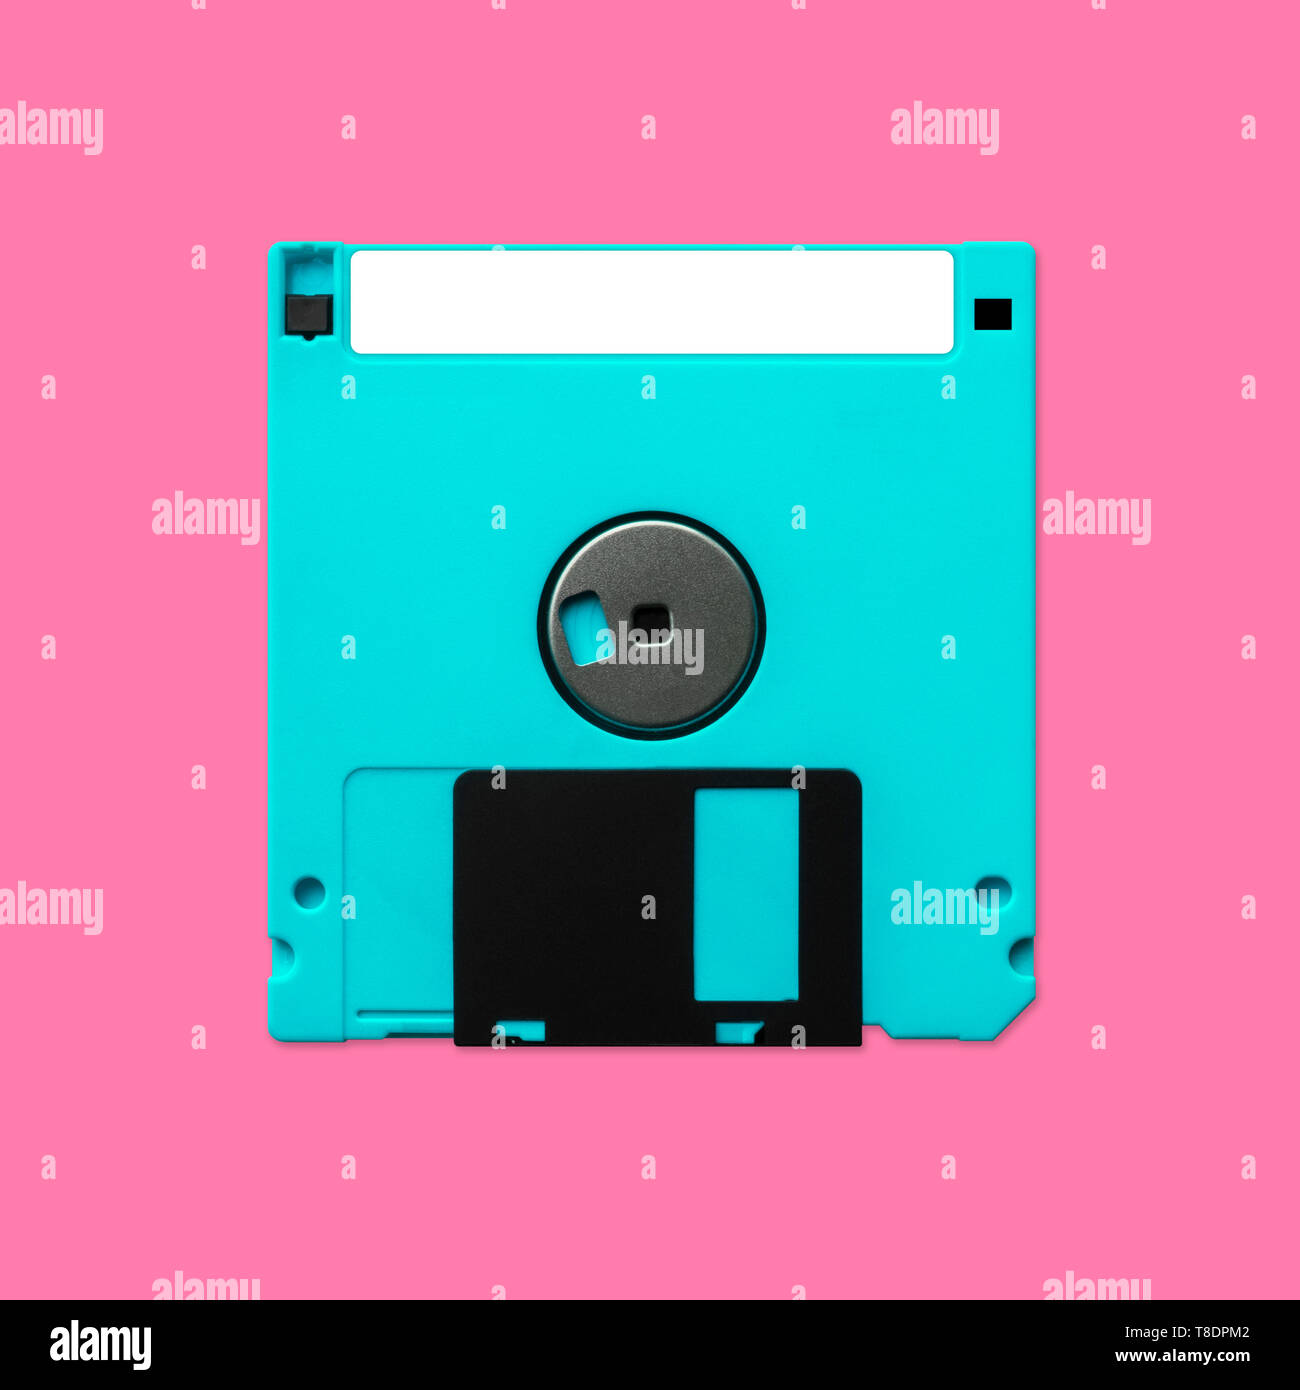 Floppy Disk 3.5 Inch Back Nostalgia, Isolated And Presented In Punchy Pastel Colors Stock Photo